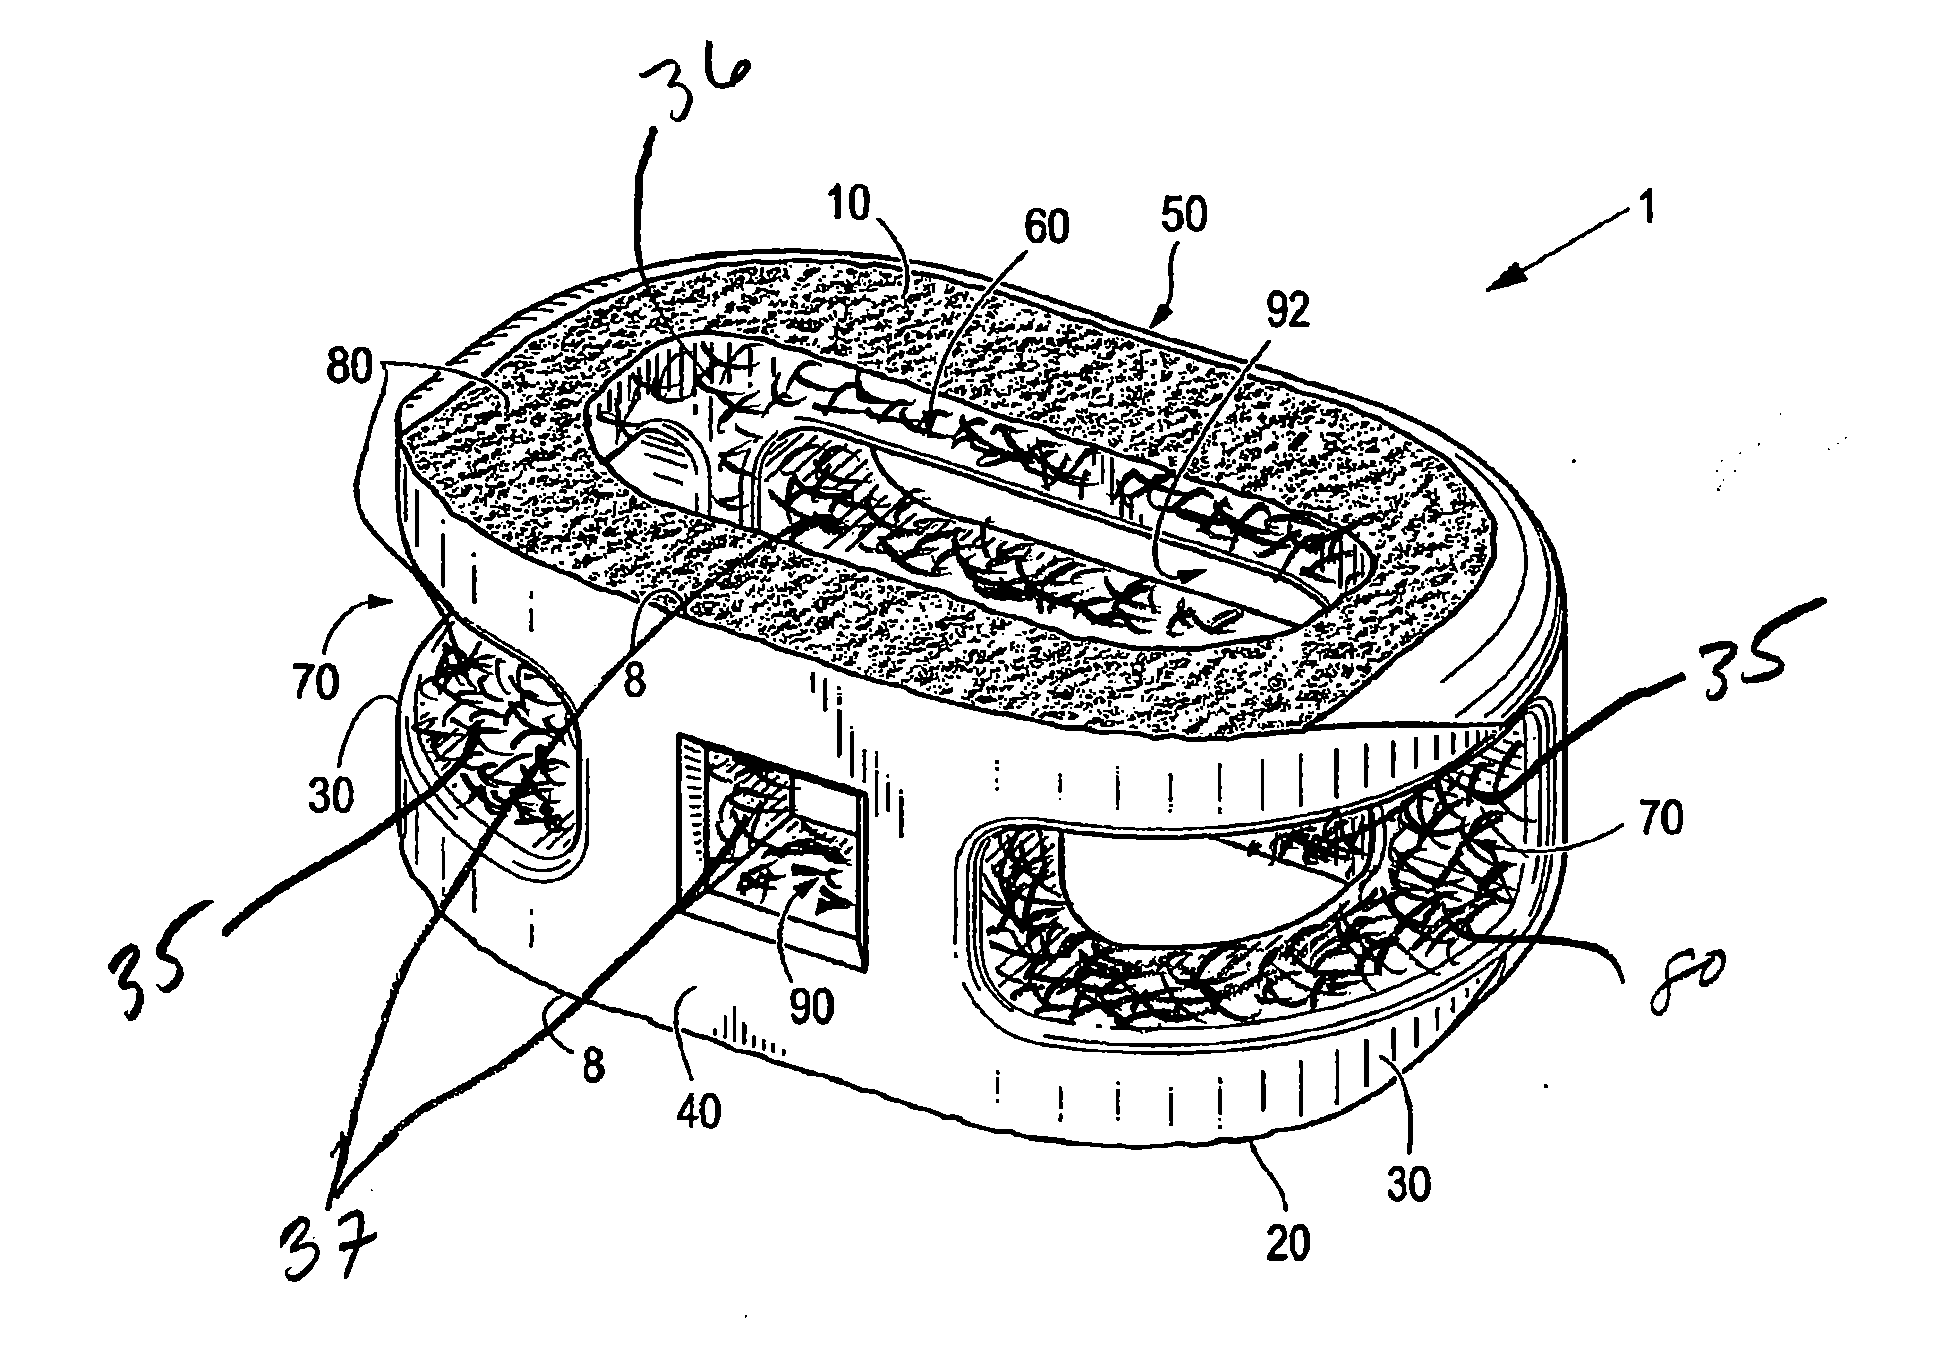 Interbody Spinal Implant Having Internally Textured Surfaces